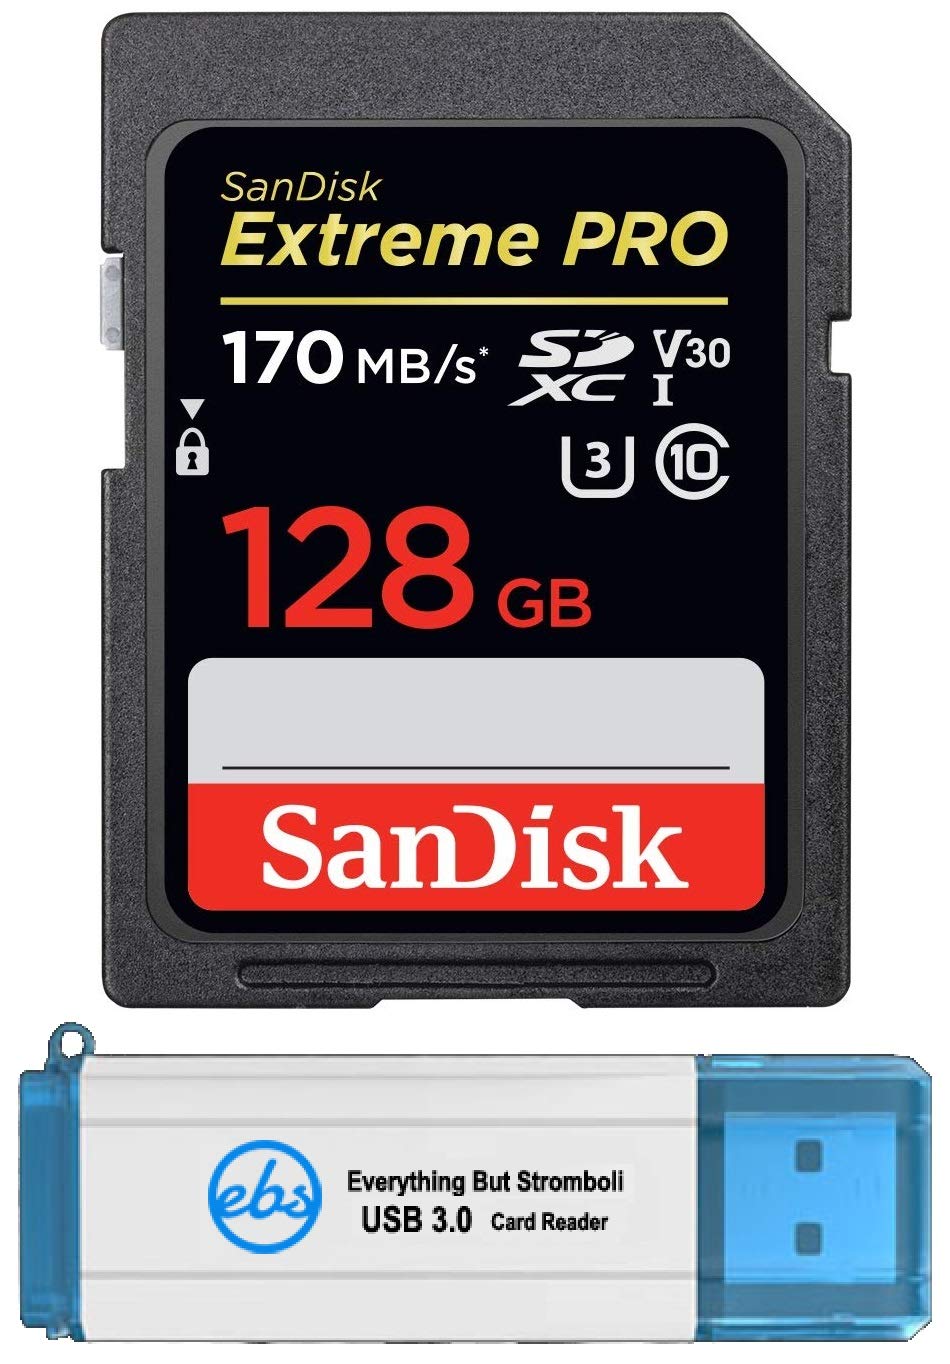 SanDisk 128GB SDXC Extreme Pro Memory Card Works with Sony Alpha a7 III Mirrorless Camera 4K V30 (SDSDXXY-128G-GN4IN) Plus (1) Everything But Stromboli (TM) 3.0 SD/Micro Card Reader Class 10 128GB